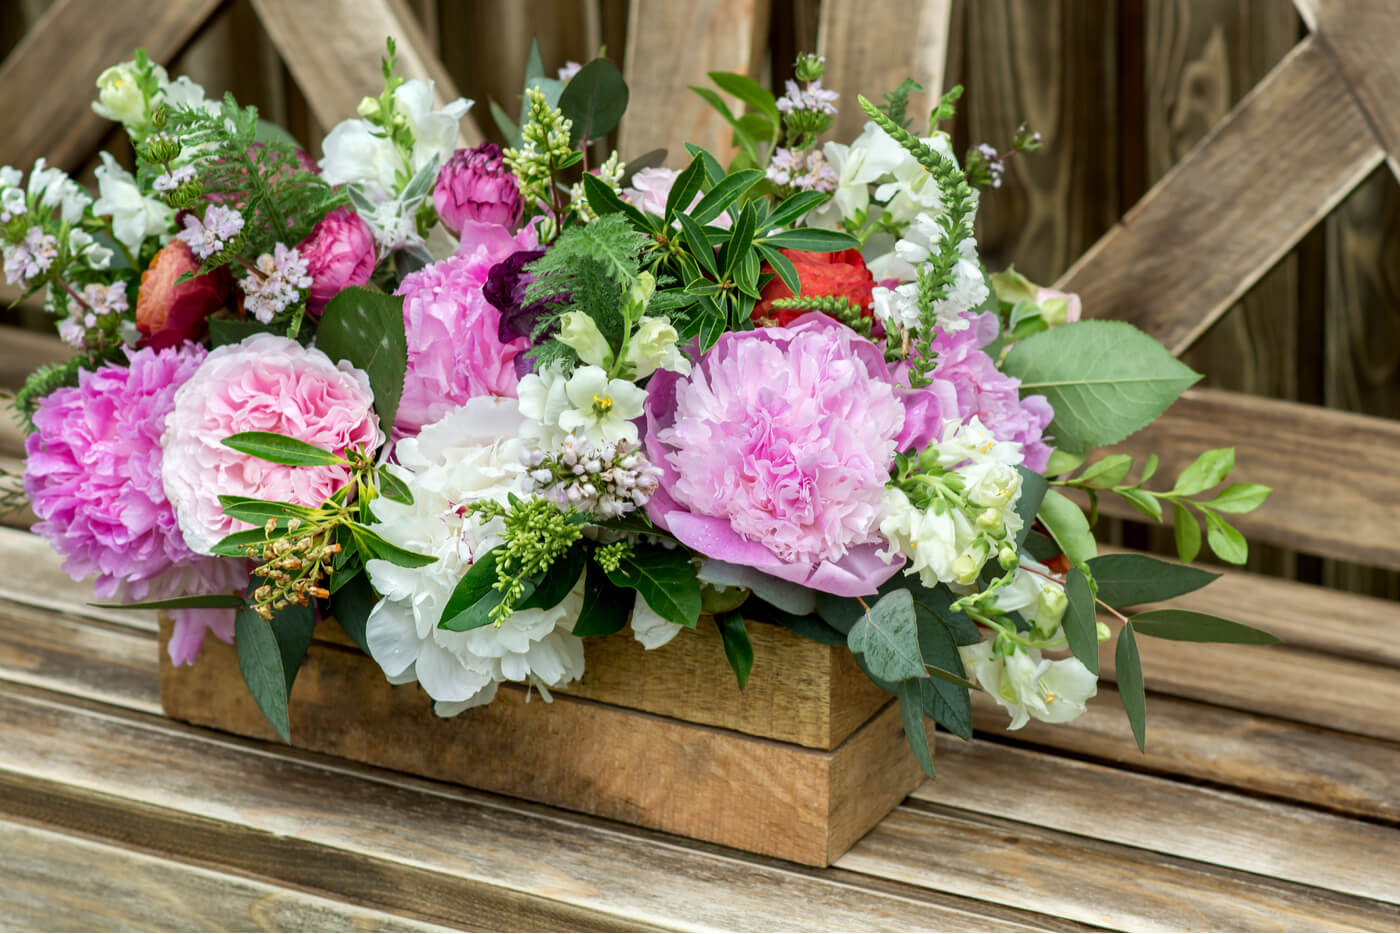 Vintage-style centerpieces, a return to the past